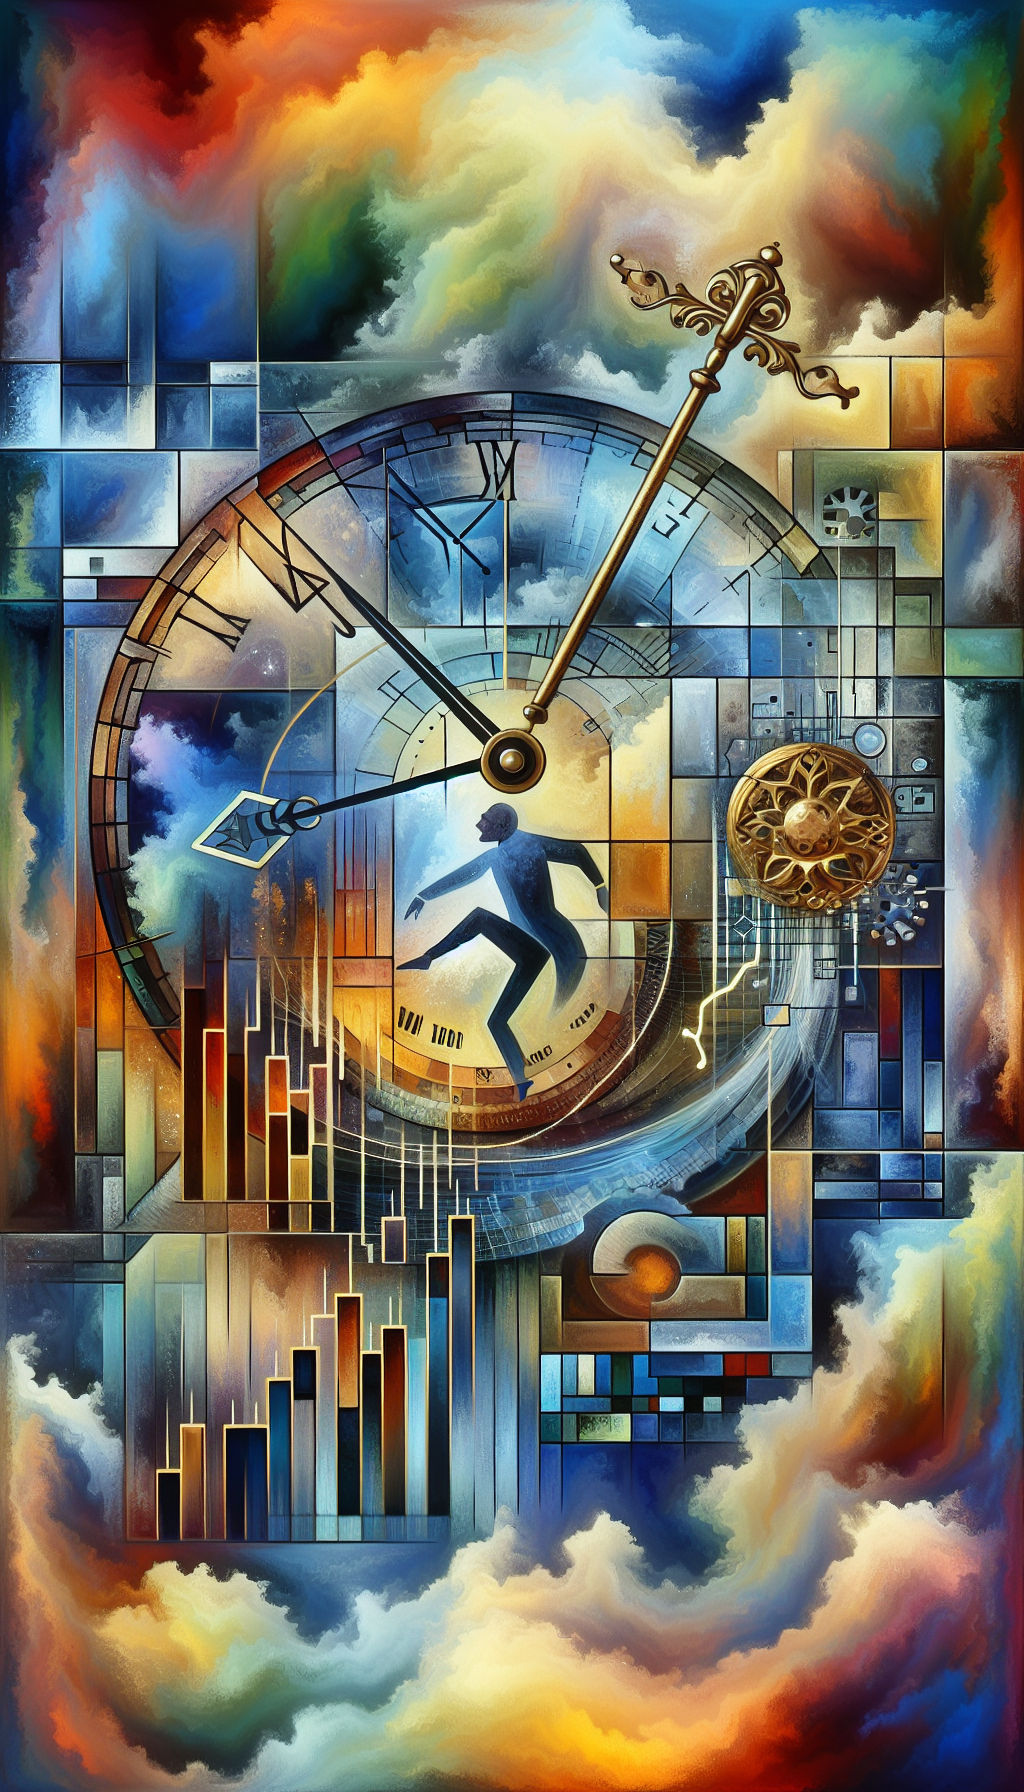 In a whimsical collage of abstract shapes and impressionist strokes, a pendulum clock morphs into a flourishing stock chart against a backdrop of emotive, color-shifting clouds. A finely detailed golden key labeled 'Value' dangles tantalizingly within reach of an investor balanced on an hour hand, symbolizing the crucial moment of opportunity in the ever-shifting moods of the market.